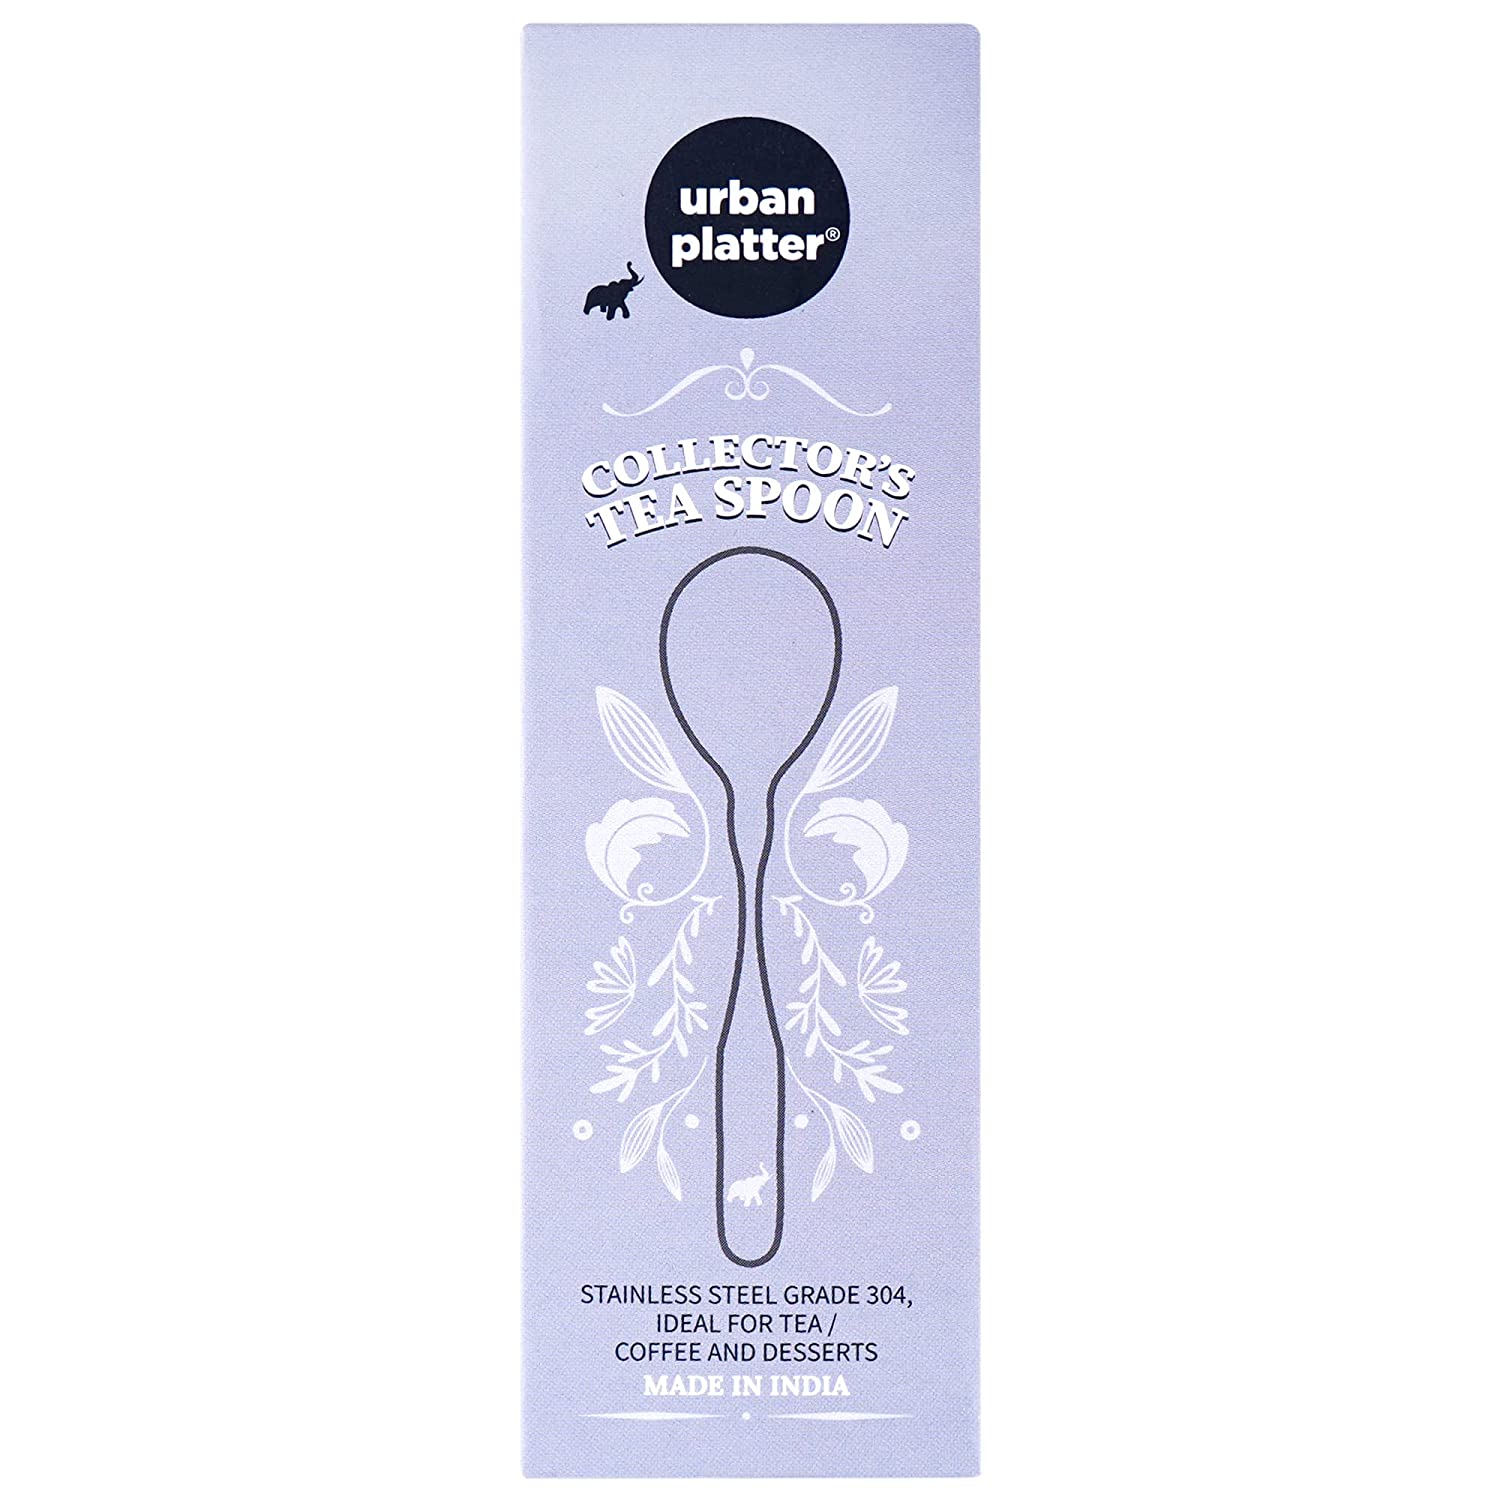 Urban Platter Collector's Tea Spoon, 3 Units (Stainless Steel Grade 304, Ideal for Tea/Coffee and Desserts, Made in India)